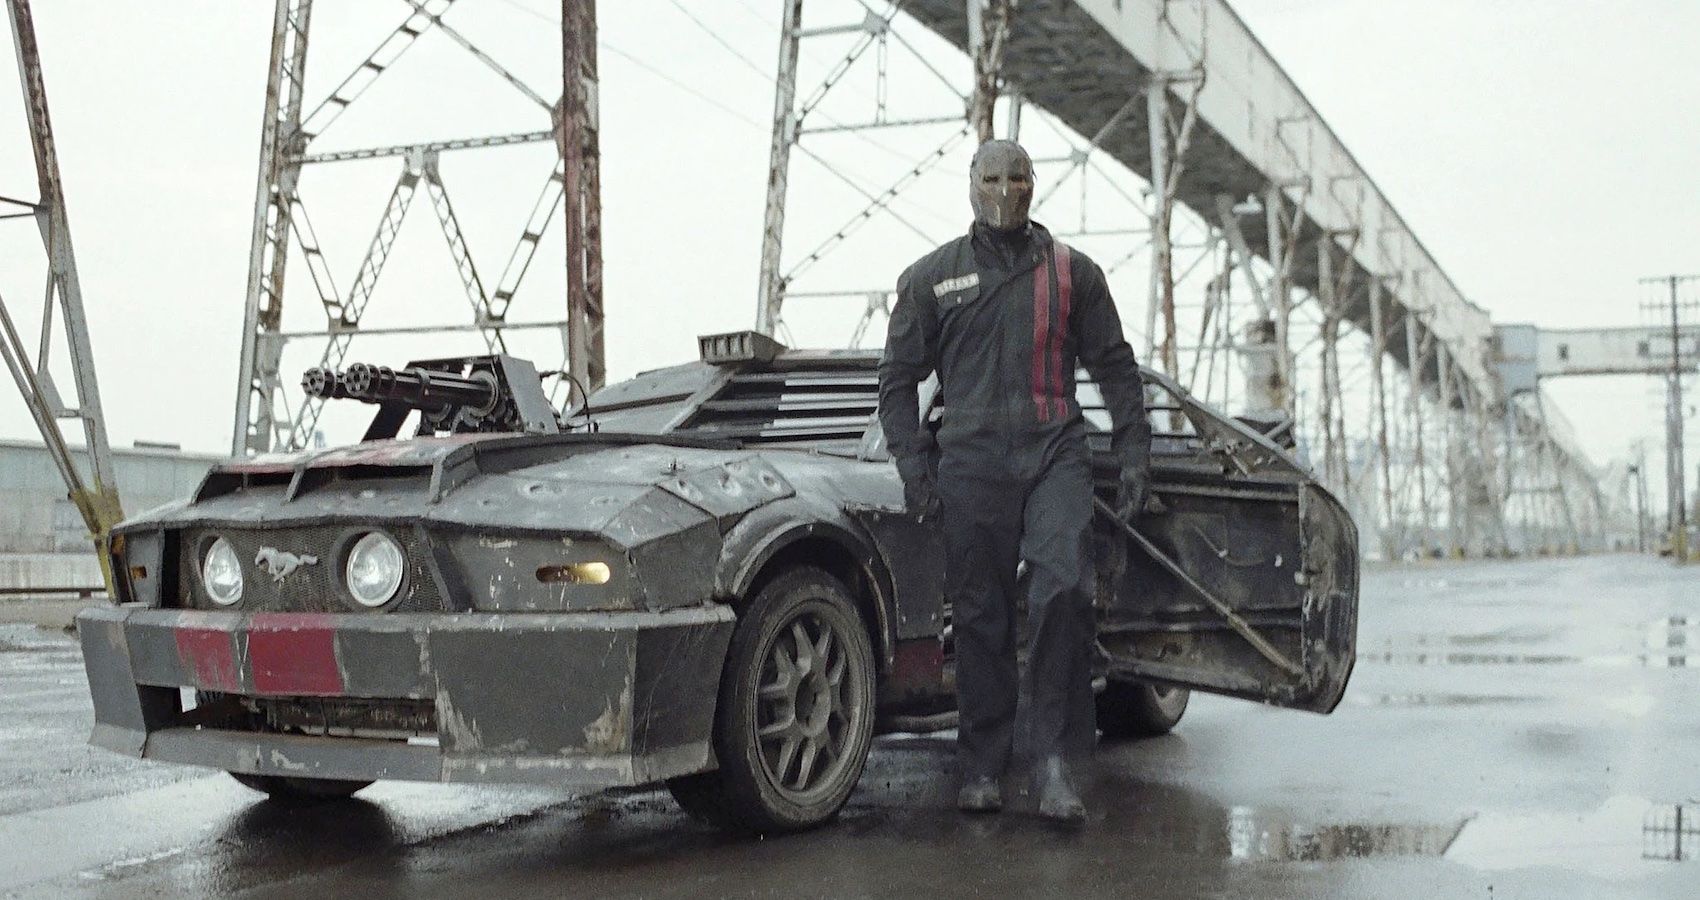 Frankenstein From The Death Race With His Mustang GT